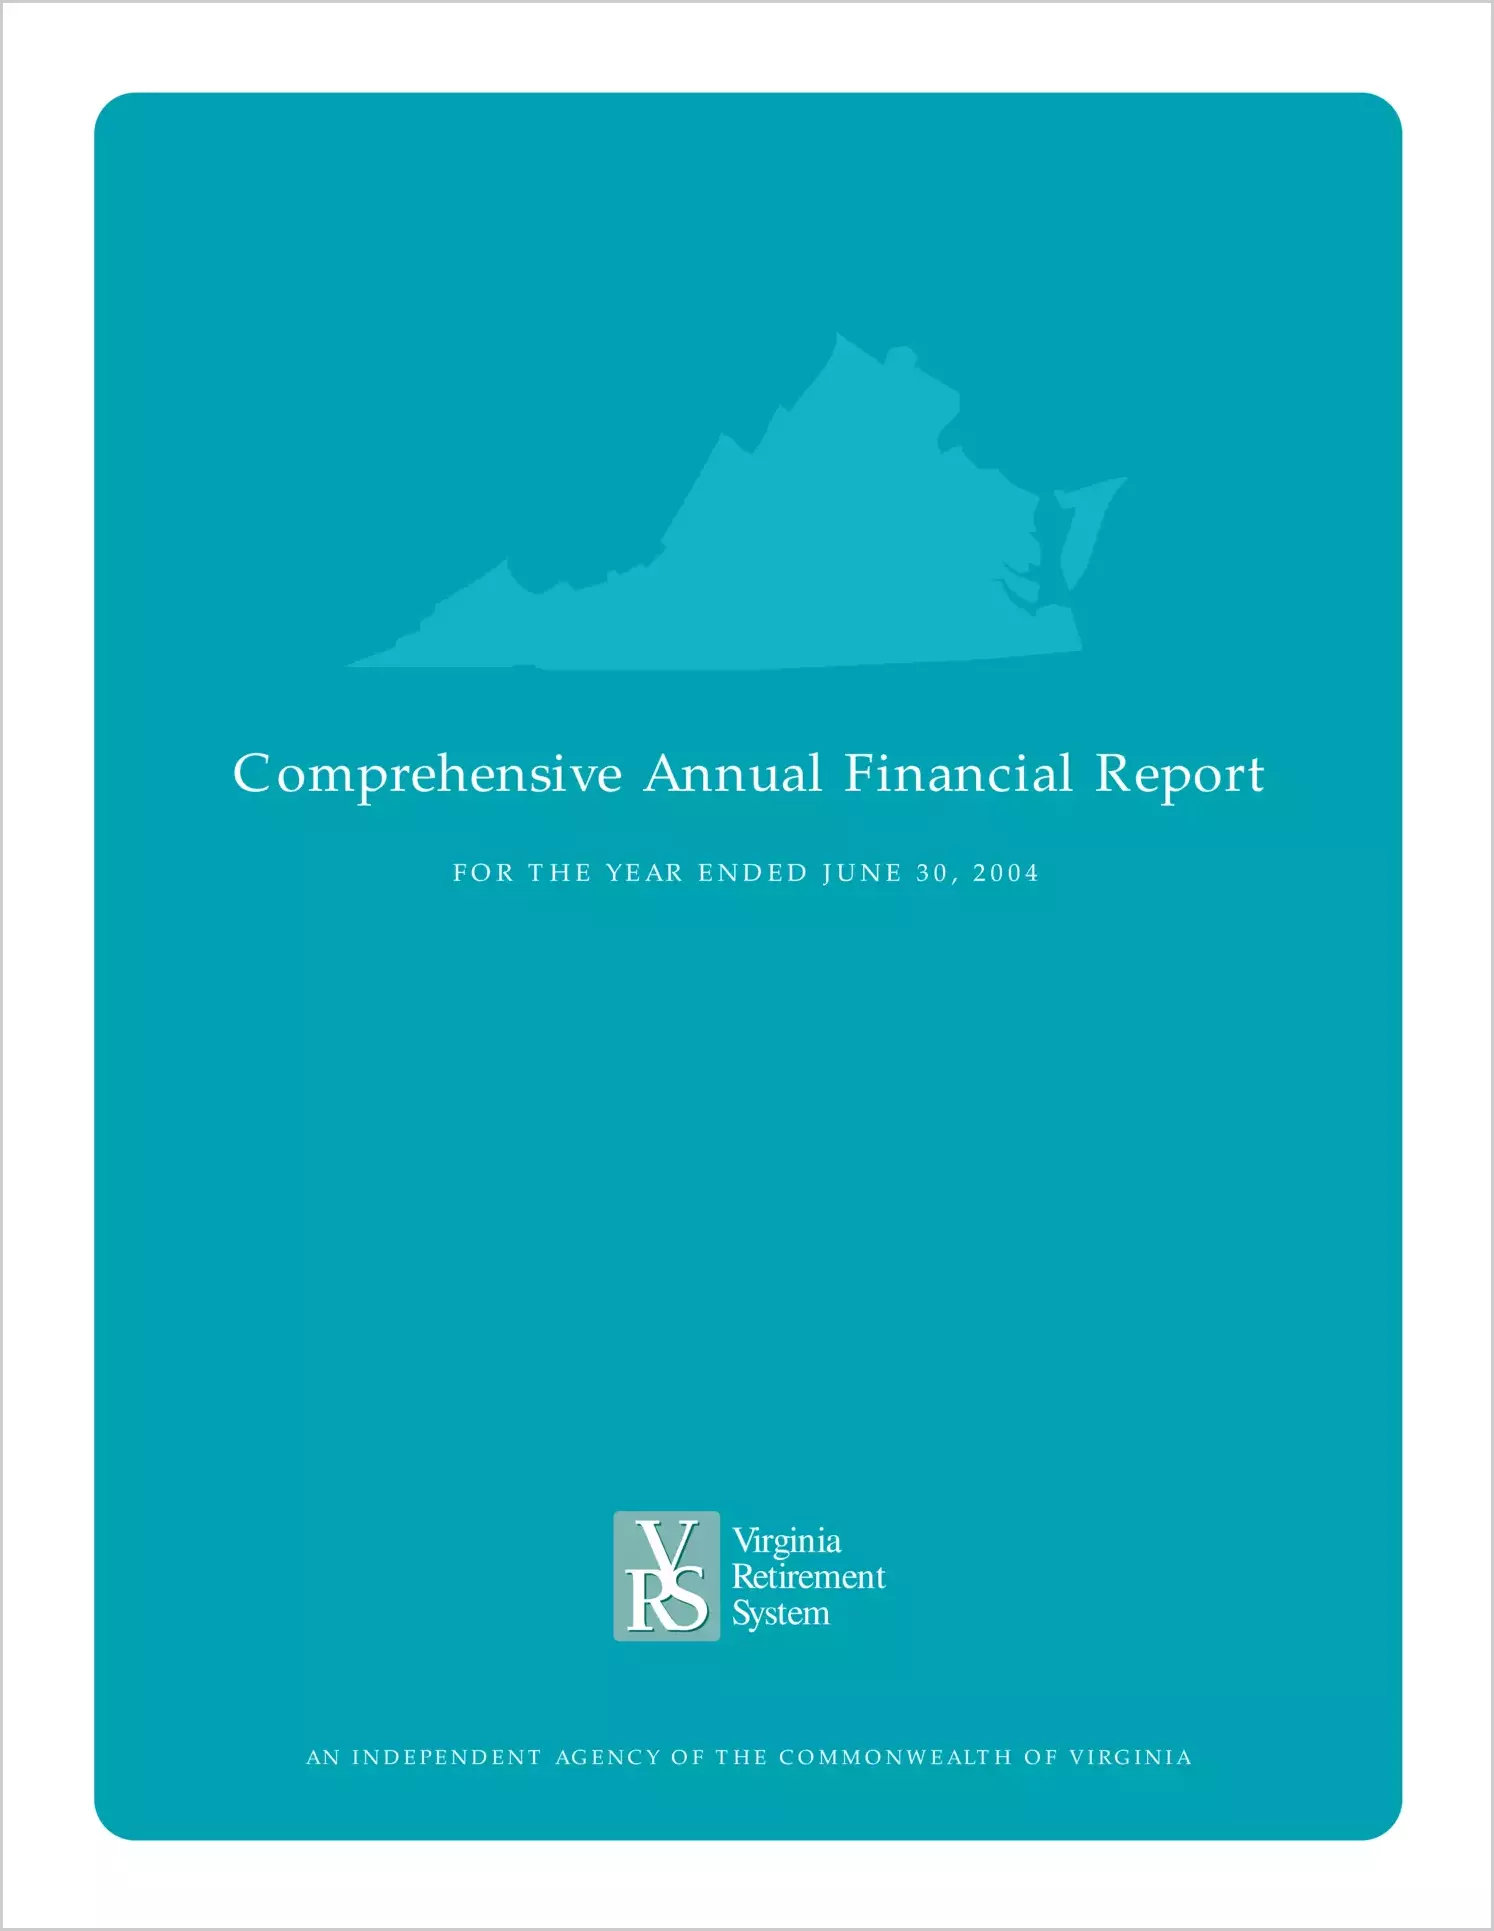 Virginia Retirement System Annual Report for the year ended June 30, 2004